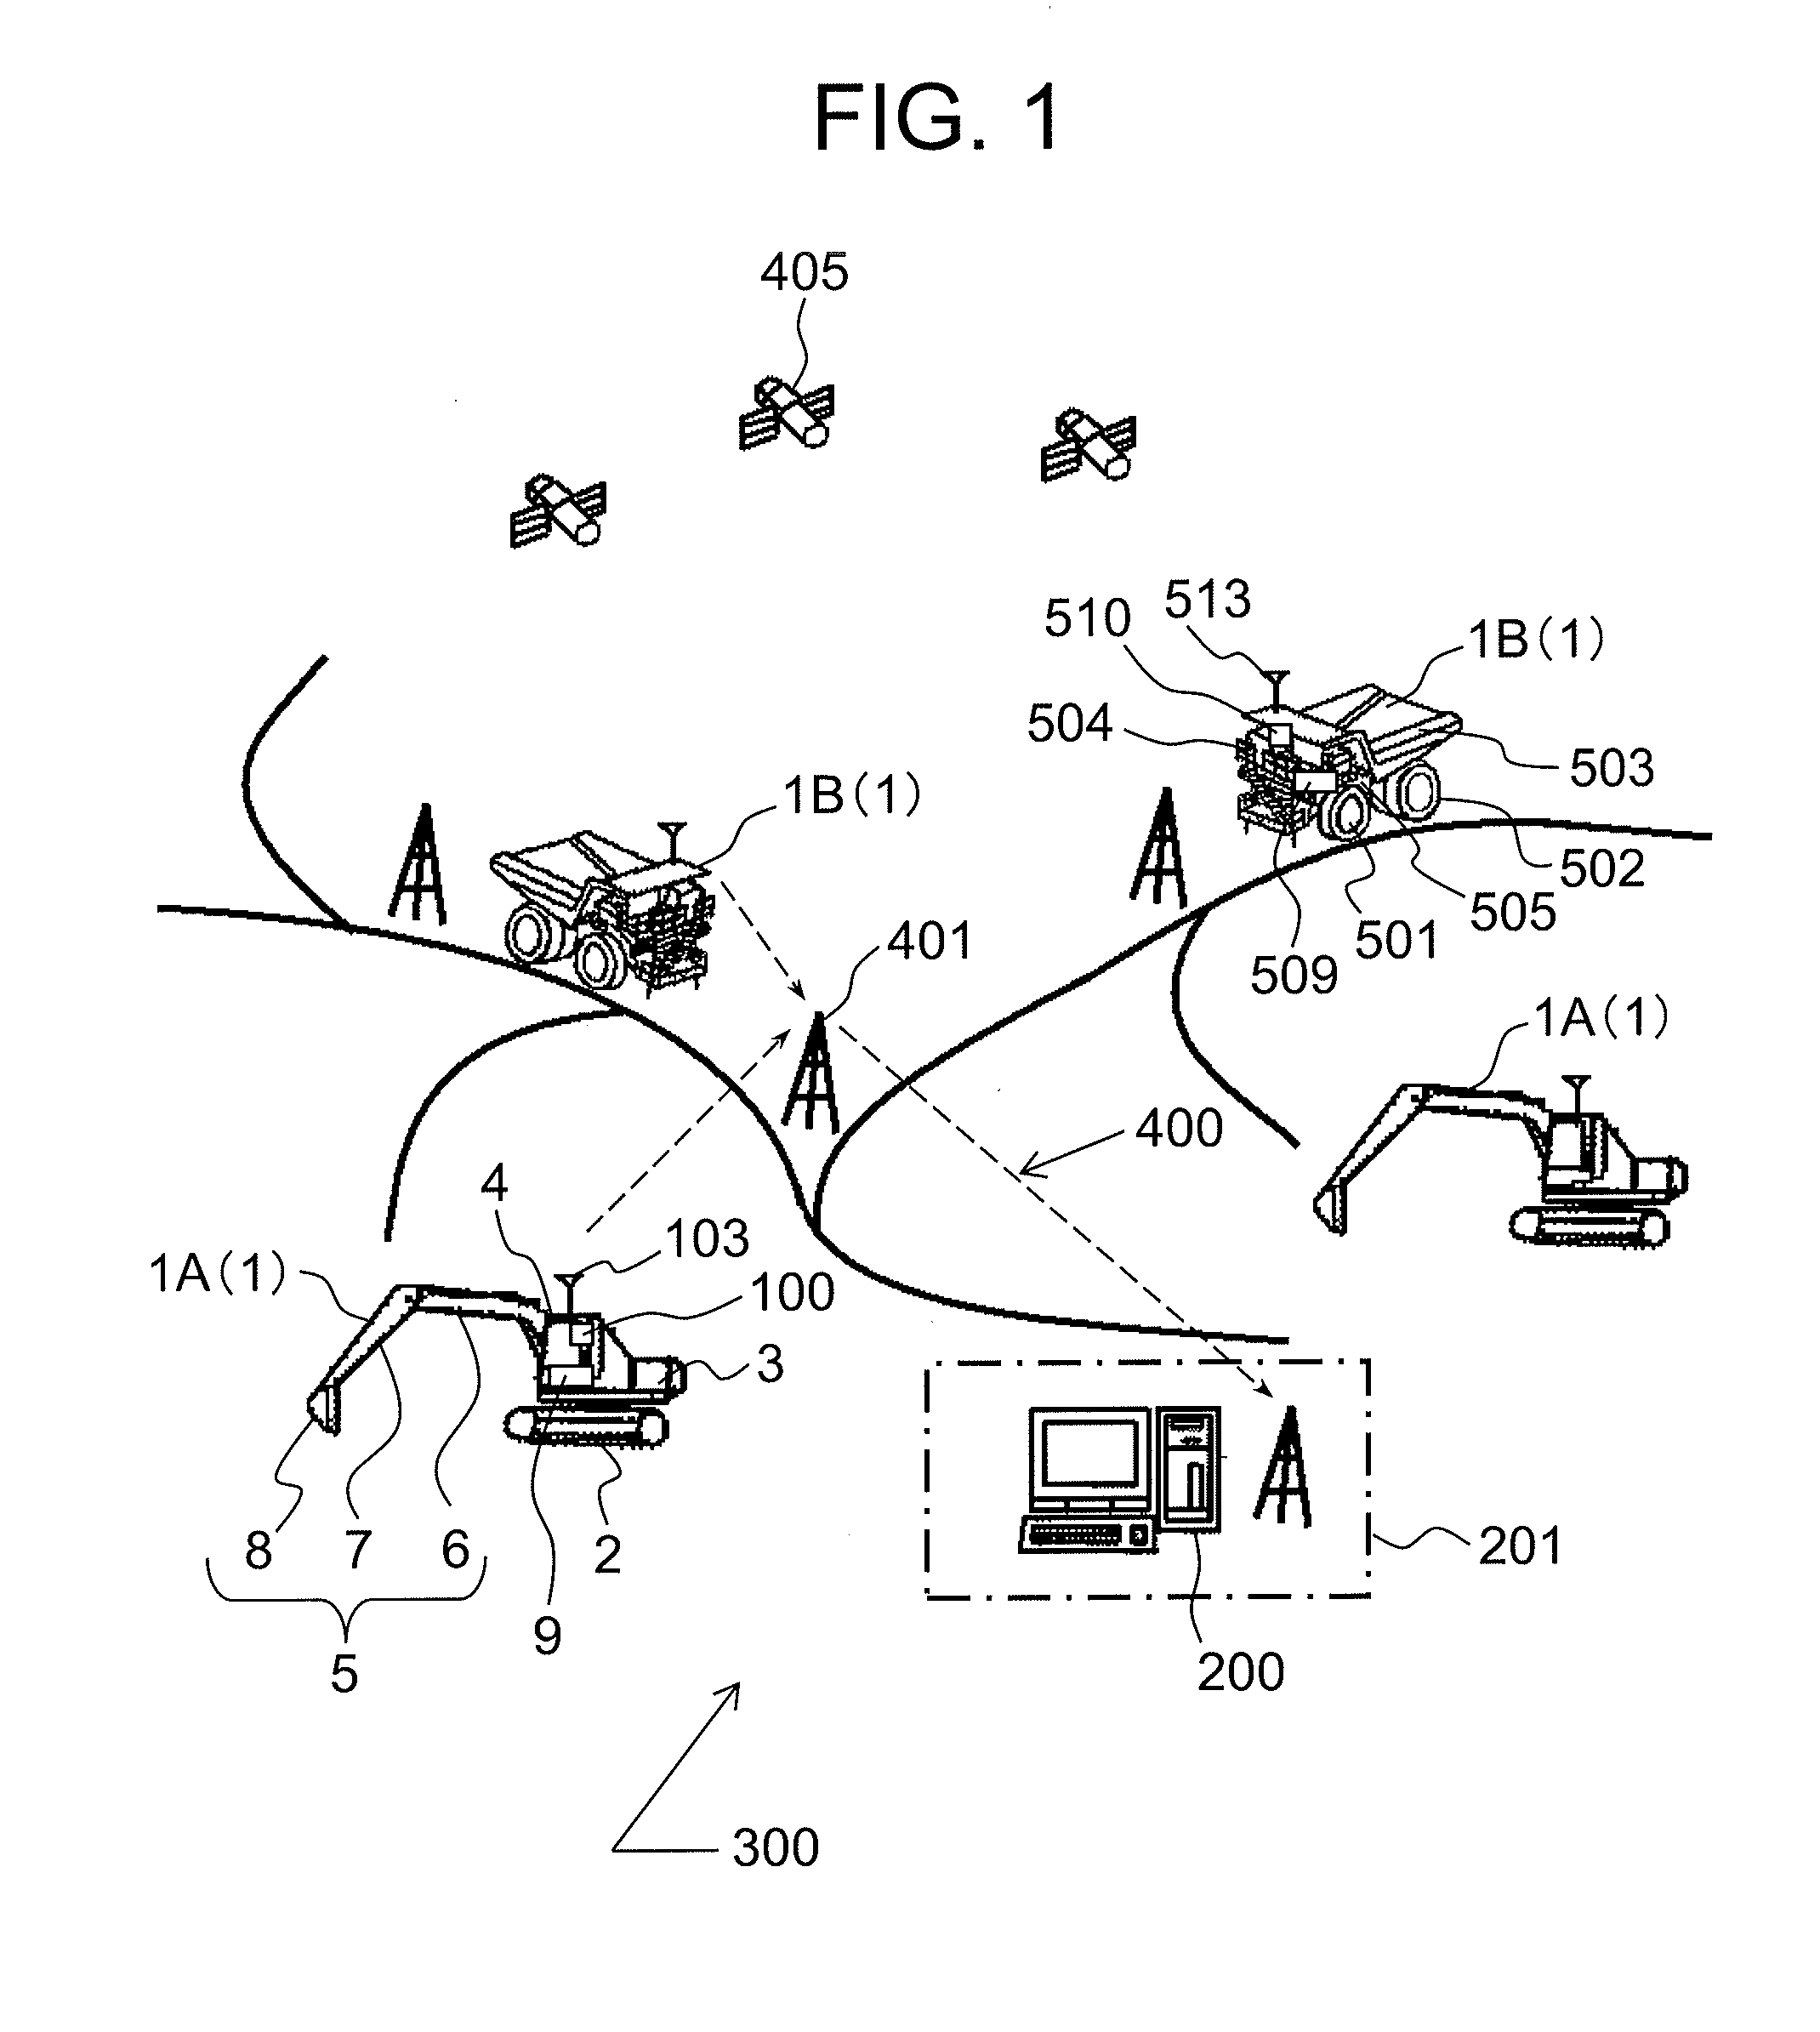 Diagnostic Processing System, Onboard Terminal System, and Server